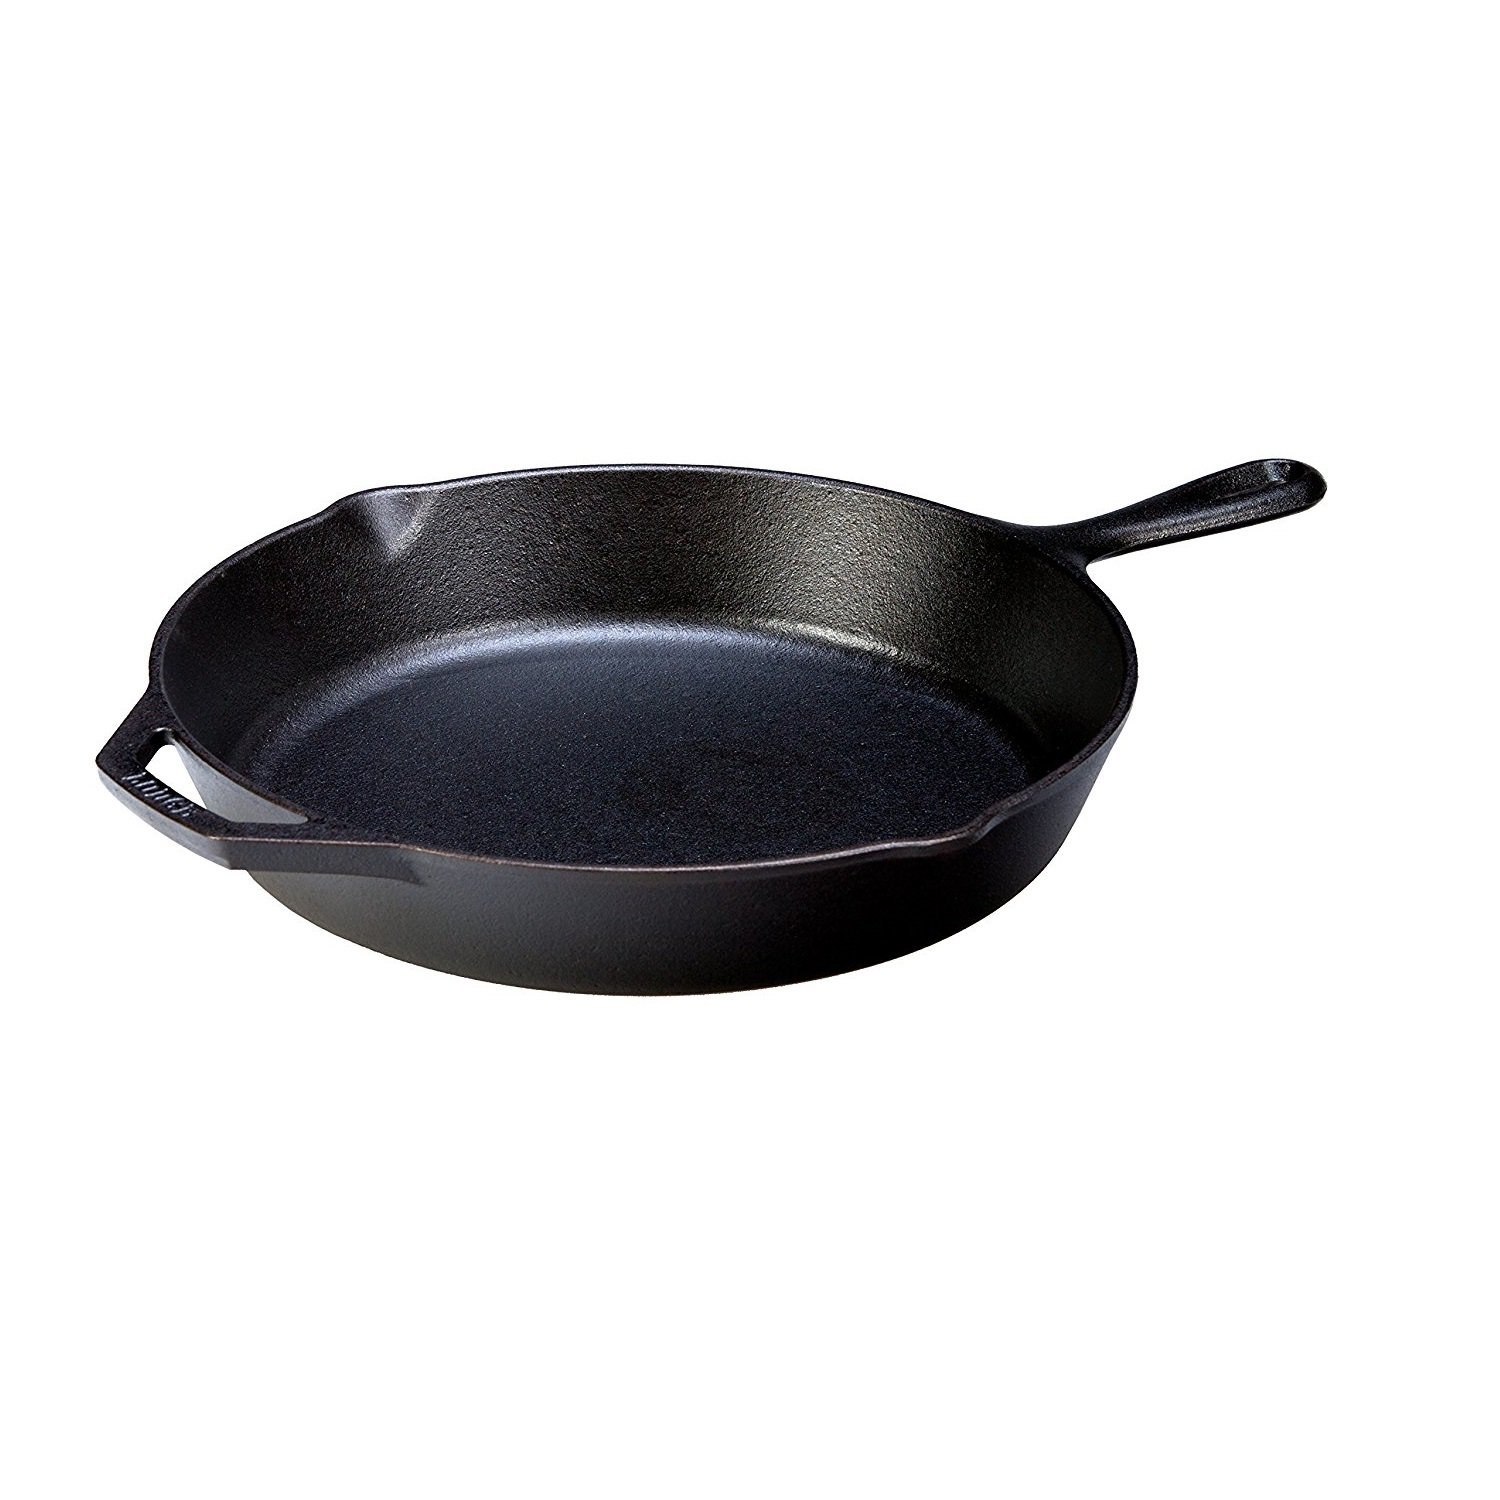 Product photo of a cast iron skillet against a white background